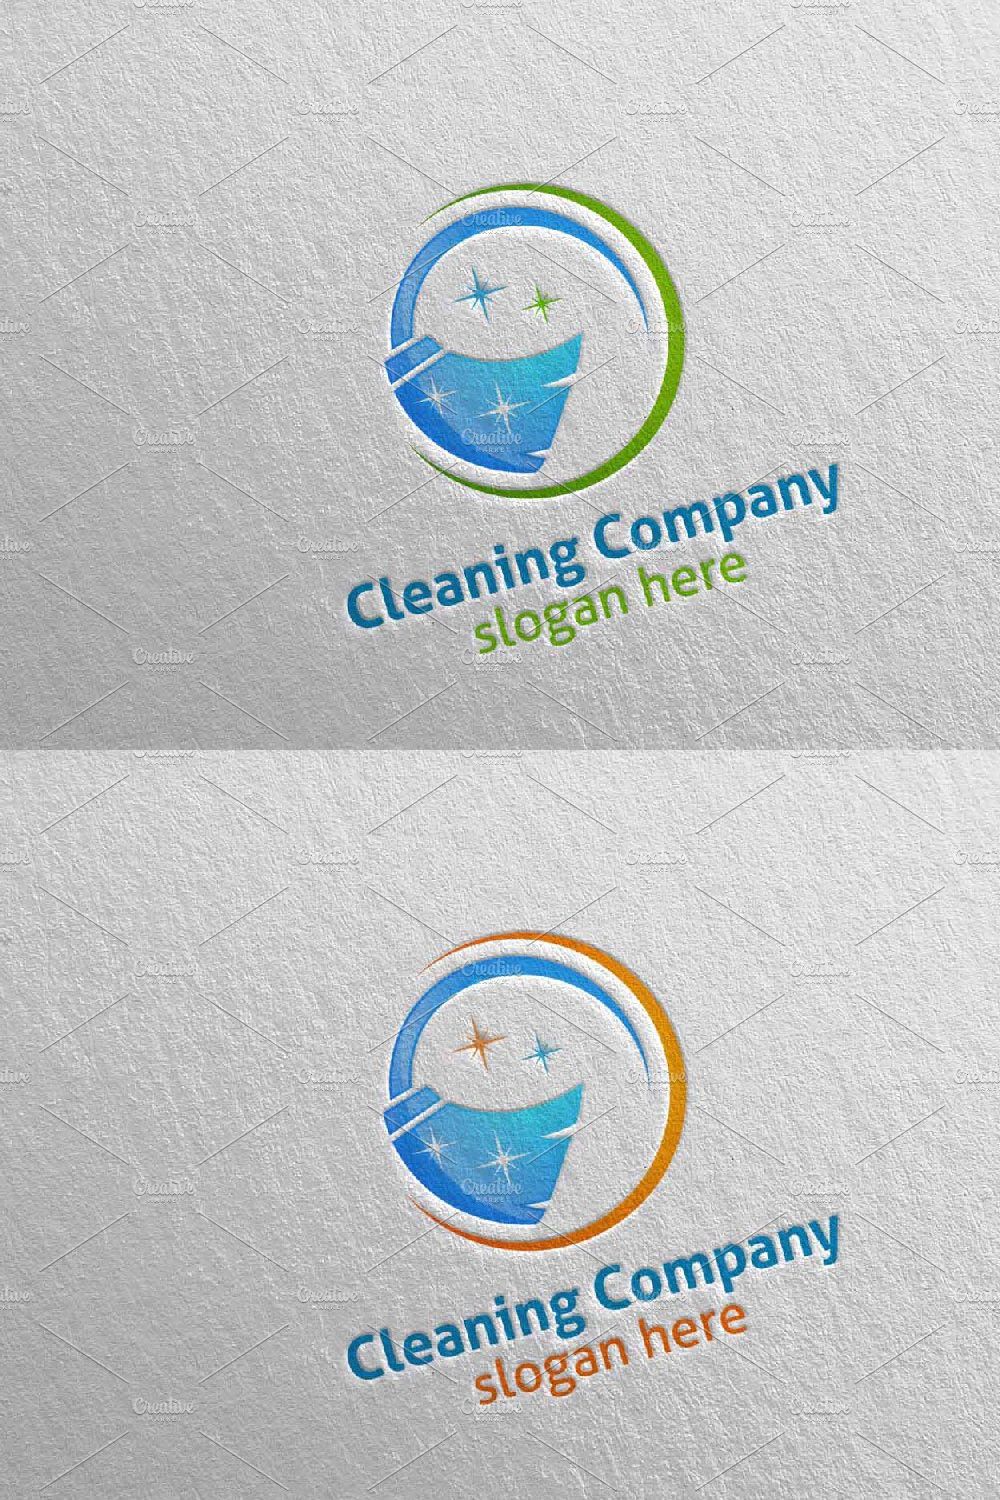 Cleaning Service Eco Friendly Logo 2 pinterest preview image.